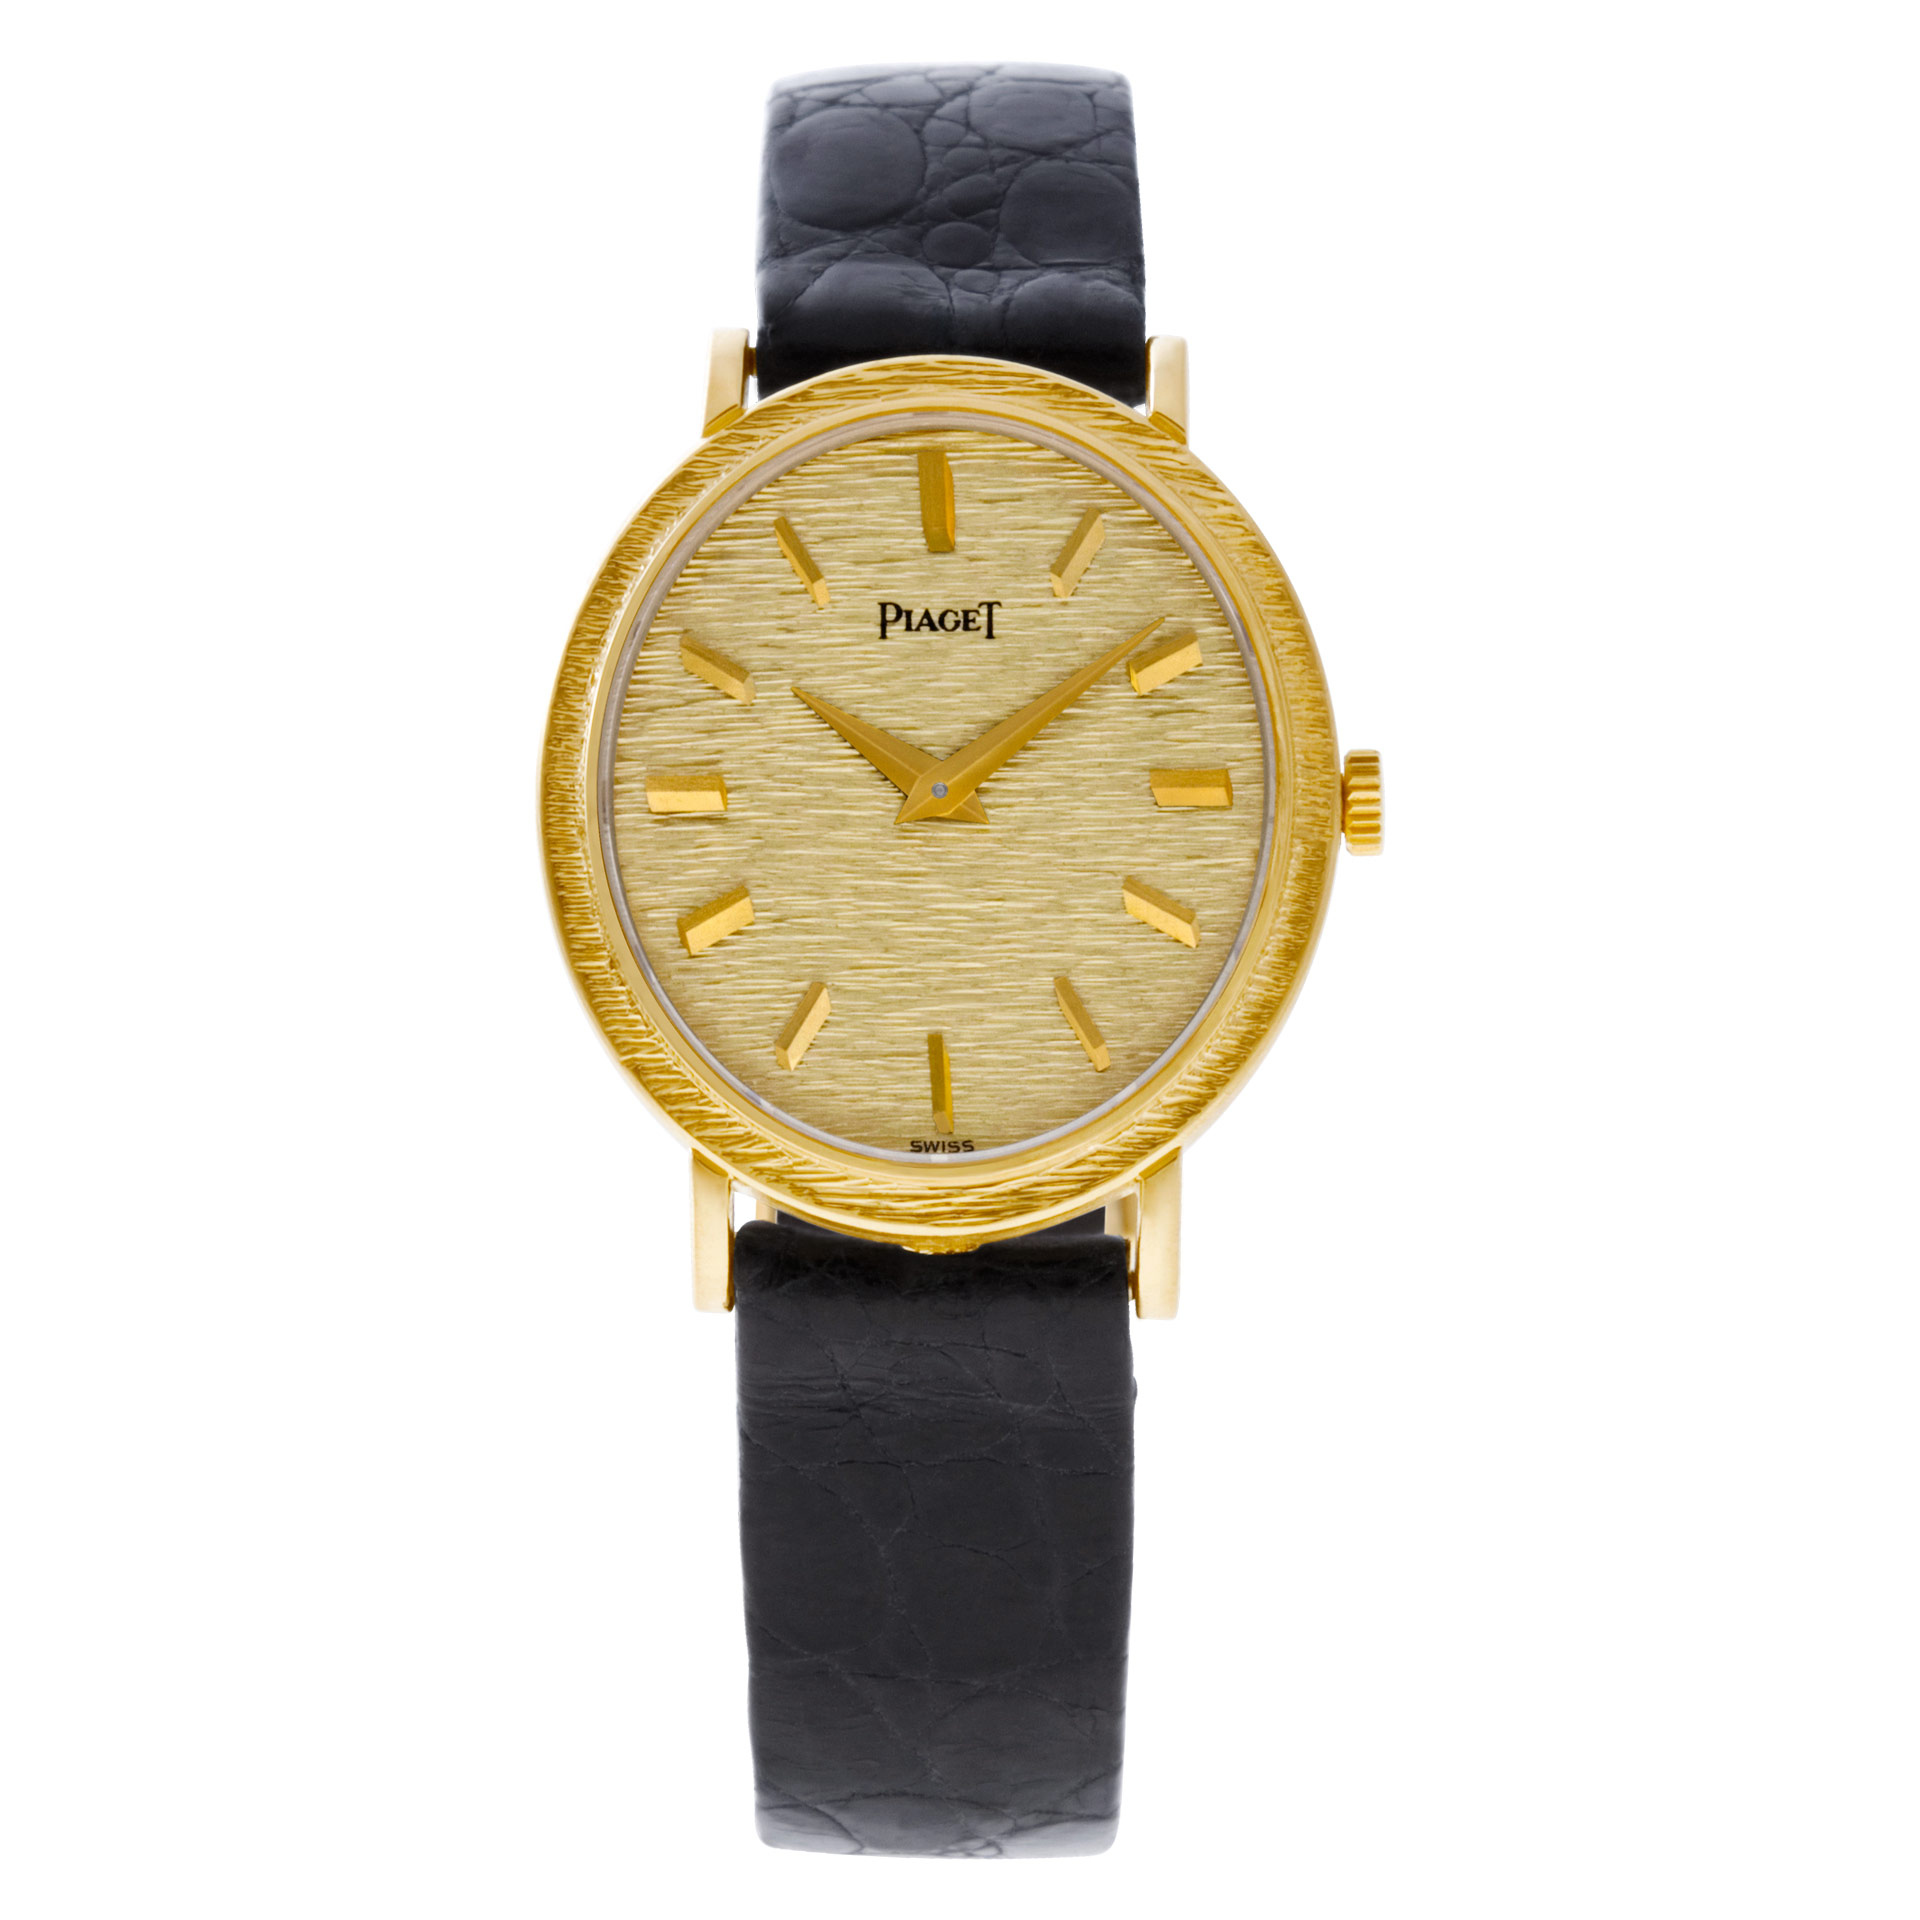 Piaget Oval 17mm 9821 image 1